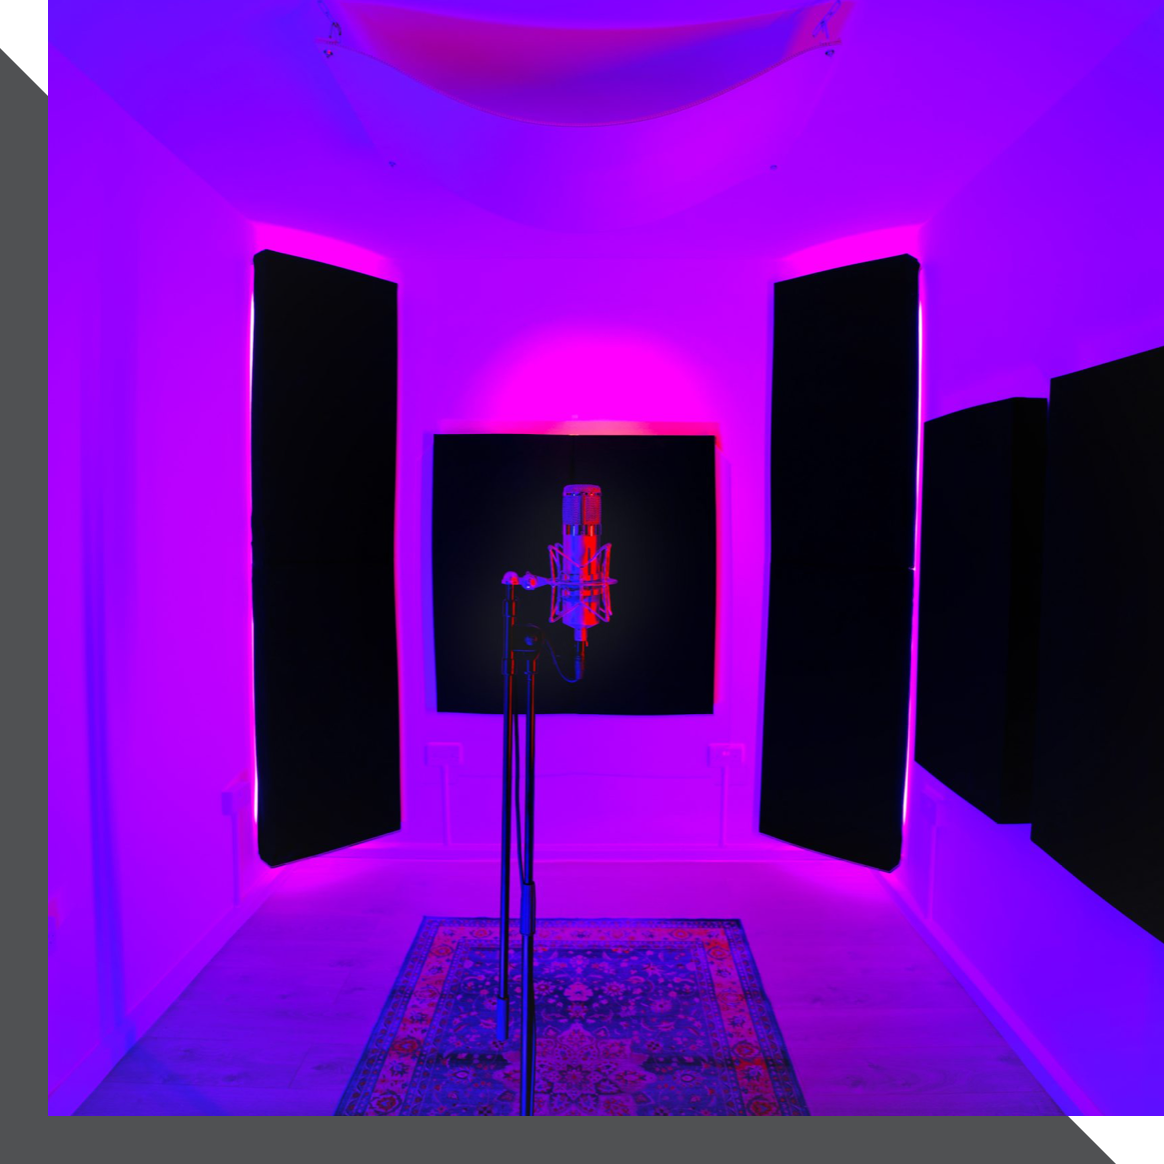 A recording studio in London is illuminated by purple and pink lights. A microphone is set up on a stand in the center of the room, which has white walls and acoustic panels. A patterned rug lies on the floor beneath the microphone.